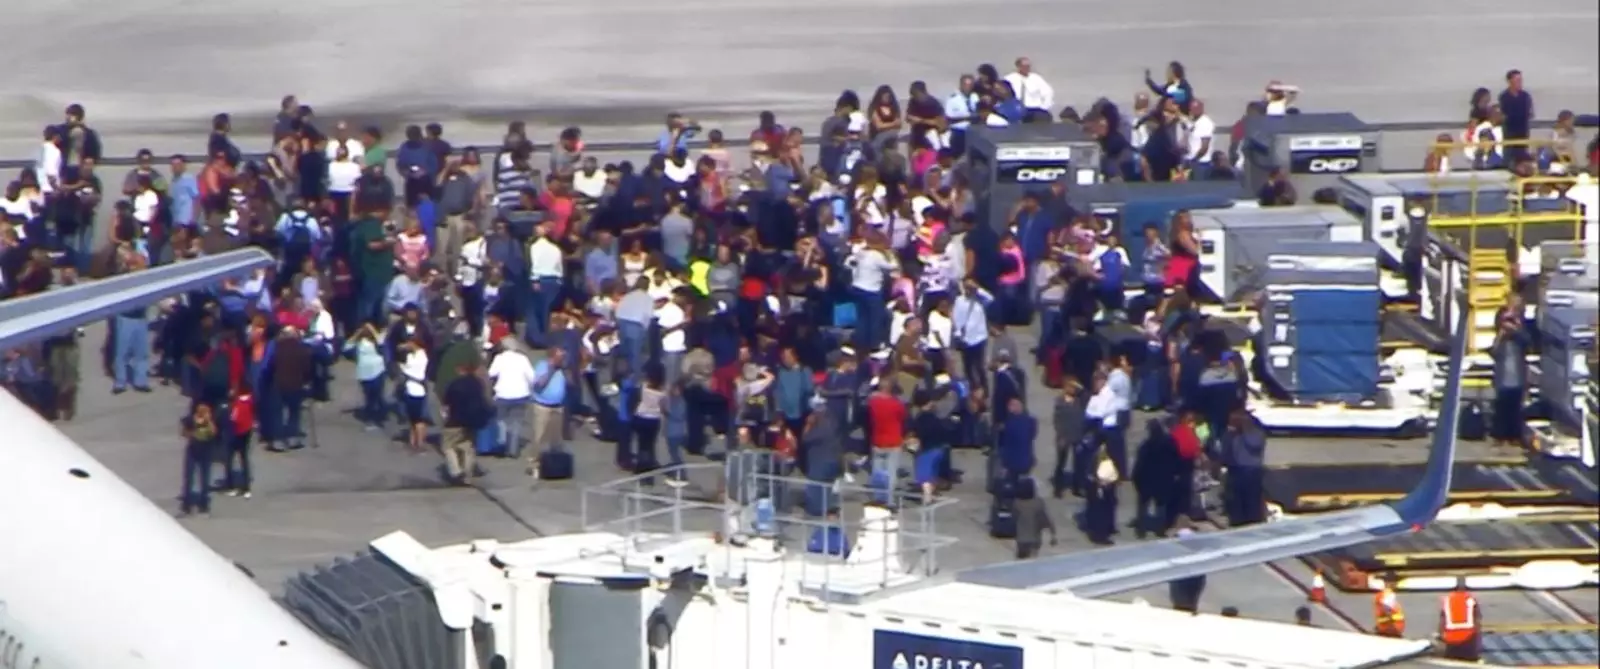 A Gunman Has Opened Fire At Fort Lauderdale Florida Airport